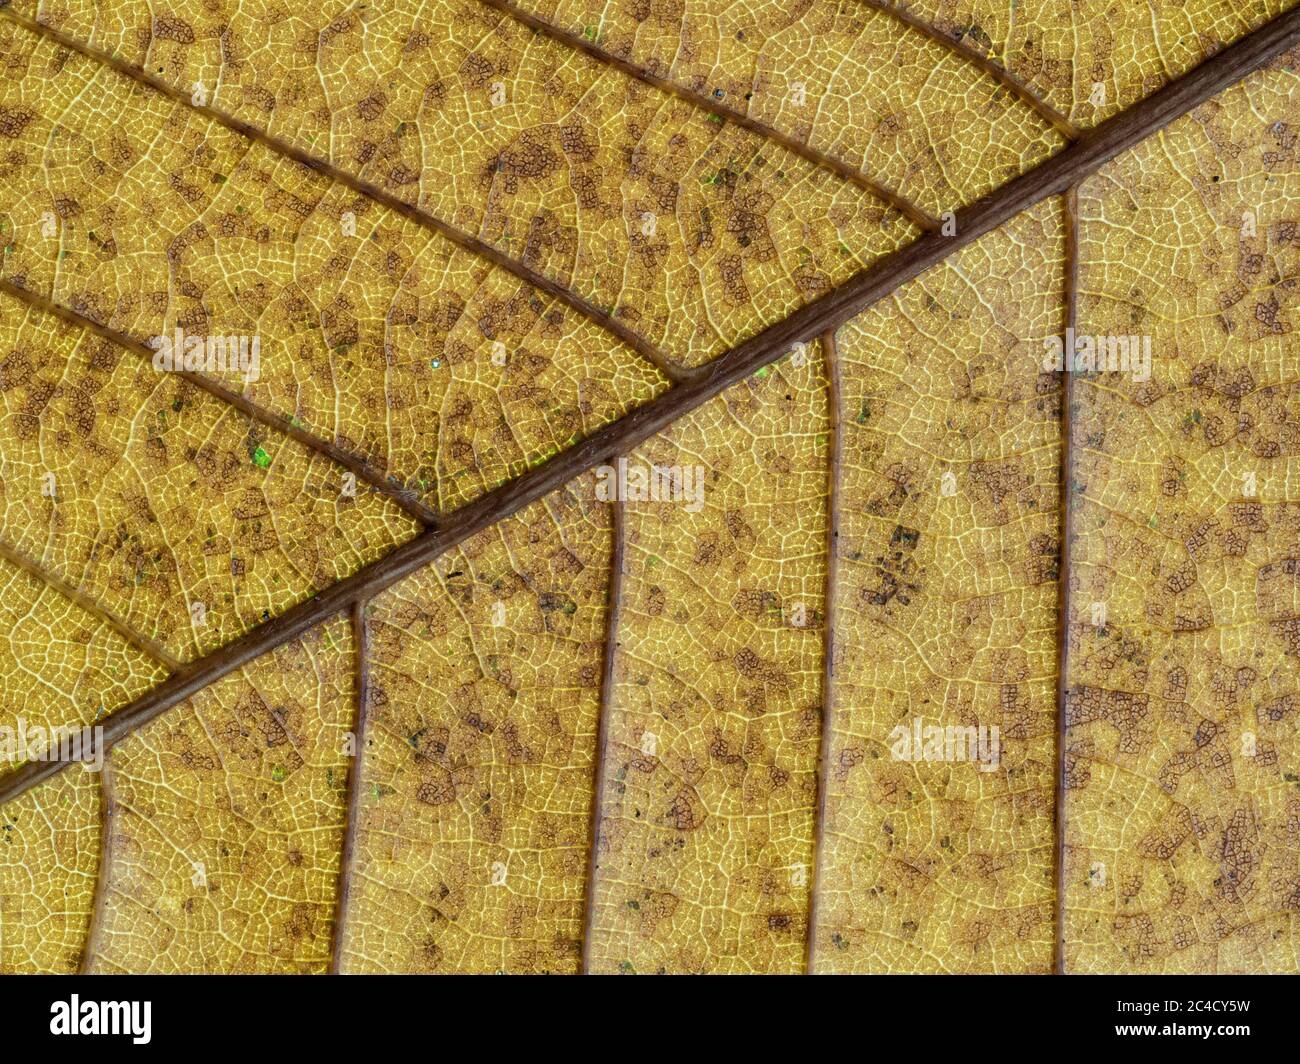 A close up of the details and patterns of the veins in a Sweet chestnut leaf Stock Photo